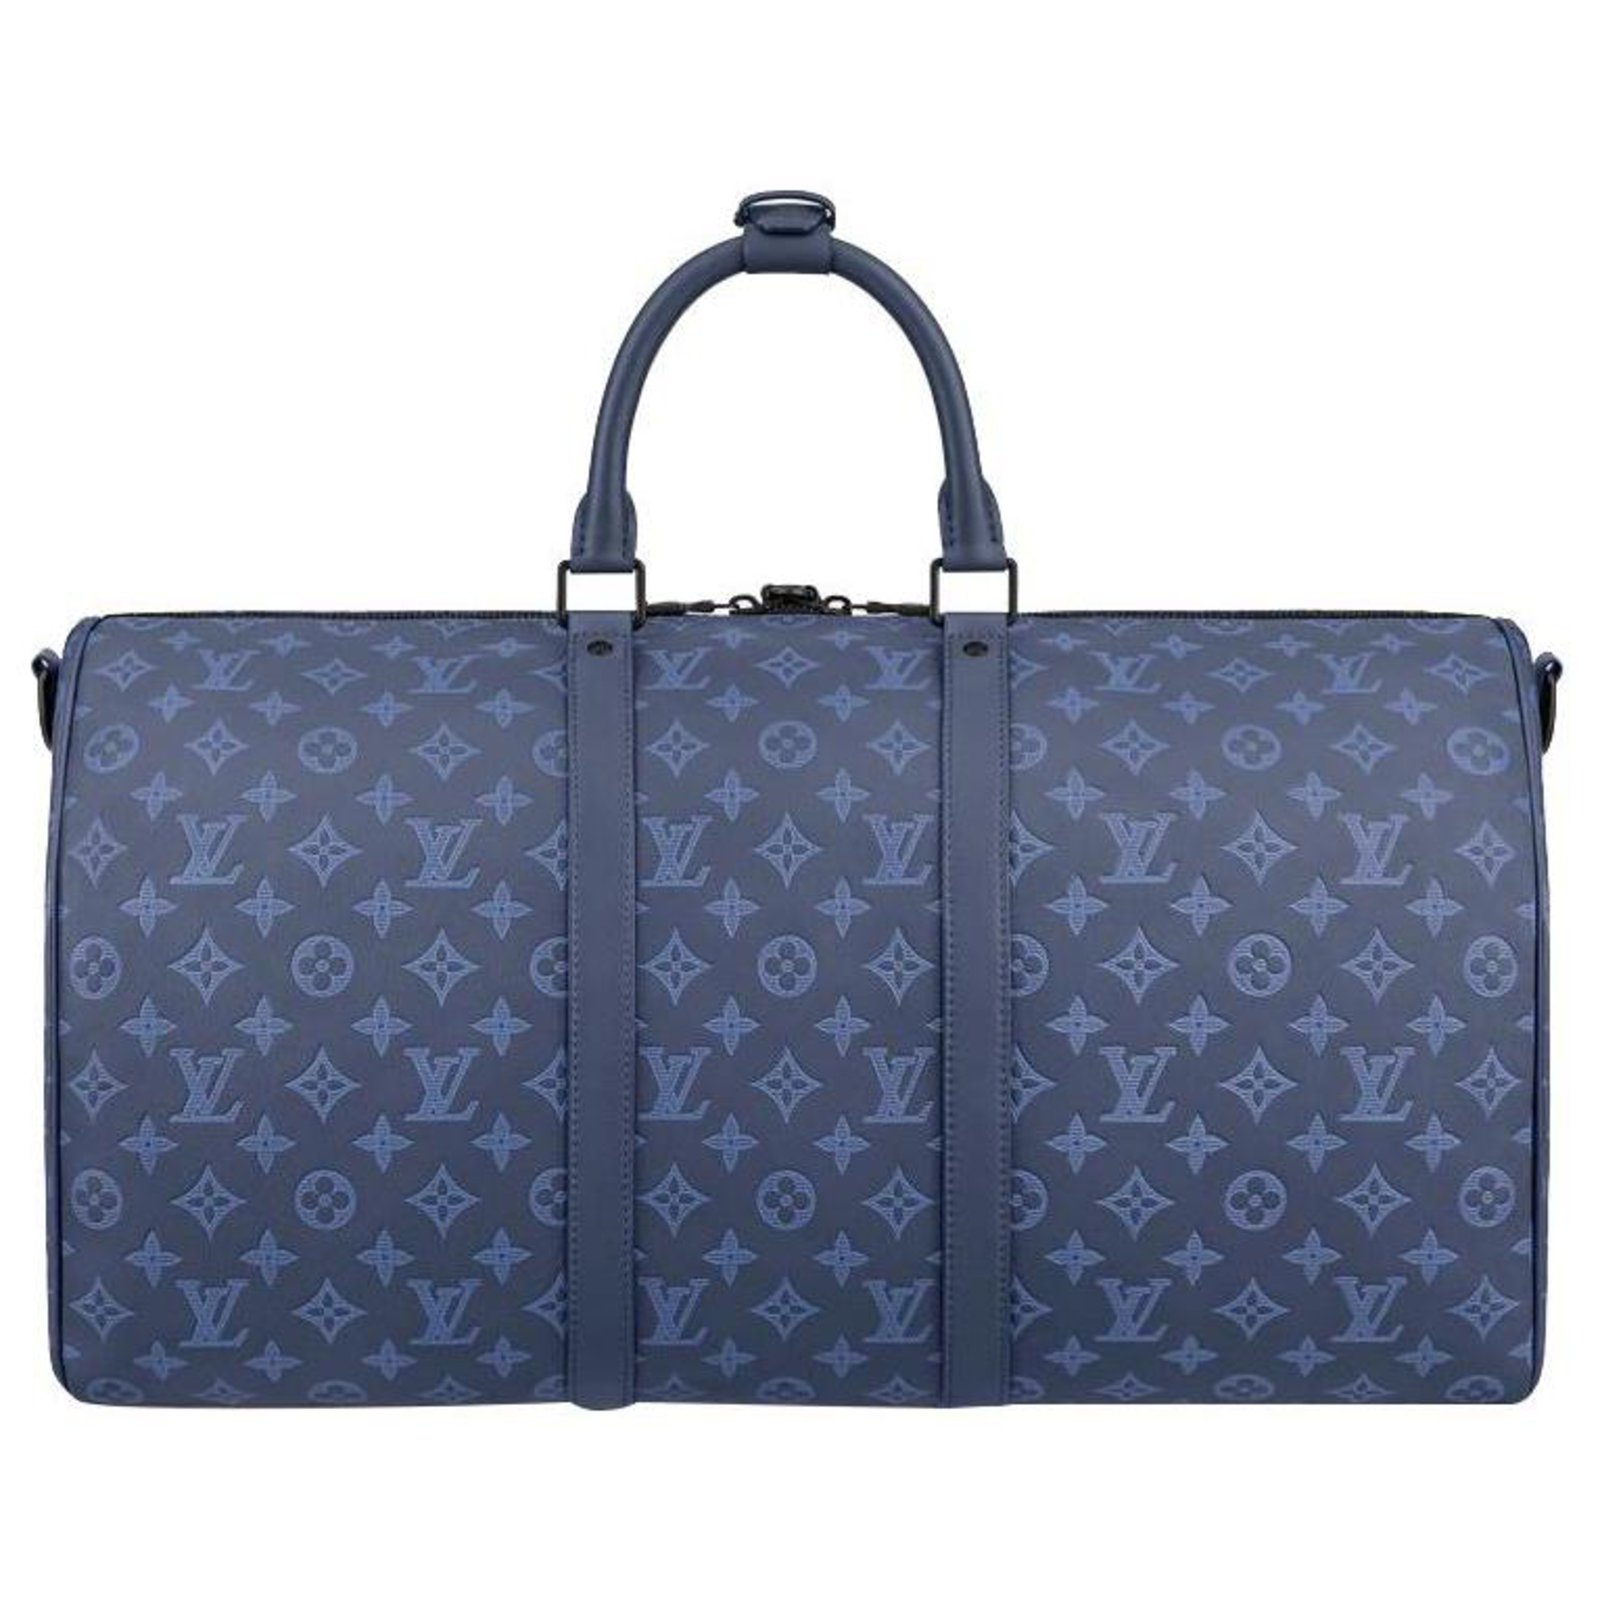 Louis Vuitton 2021 pre-owned Limited Edition Keepall 50